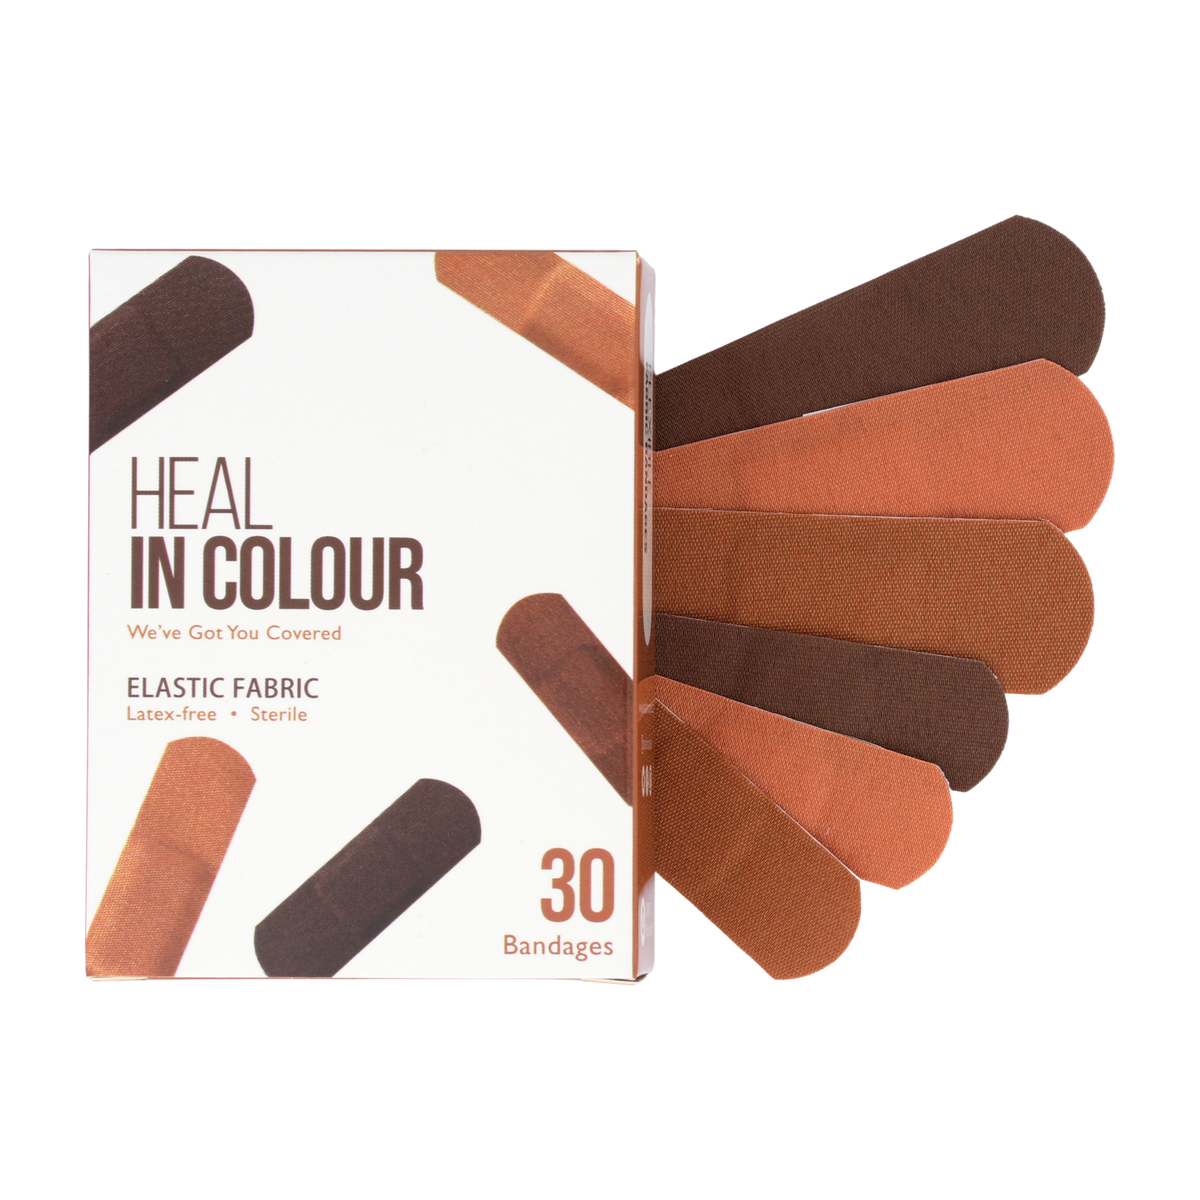 Box of Heal in Colour black and brown bandages